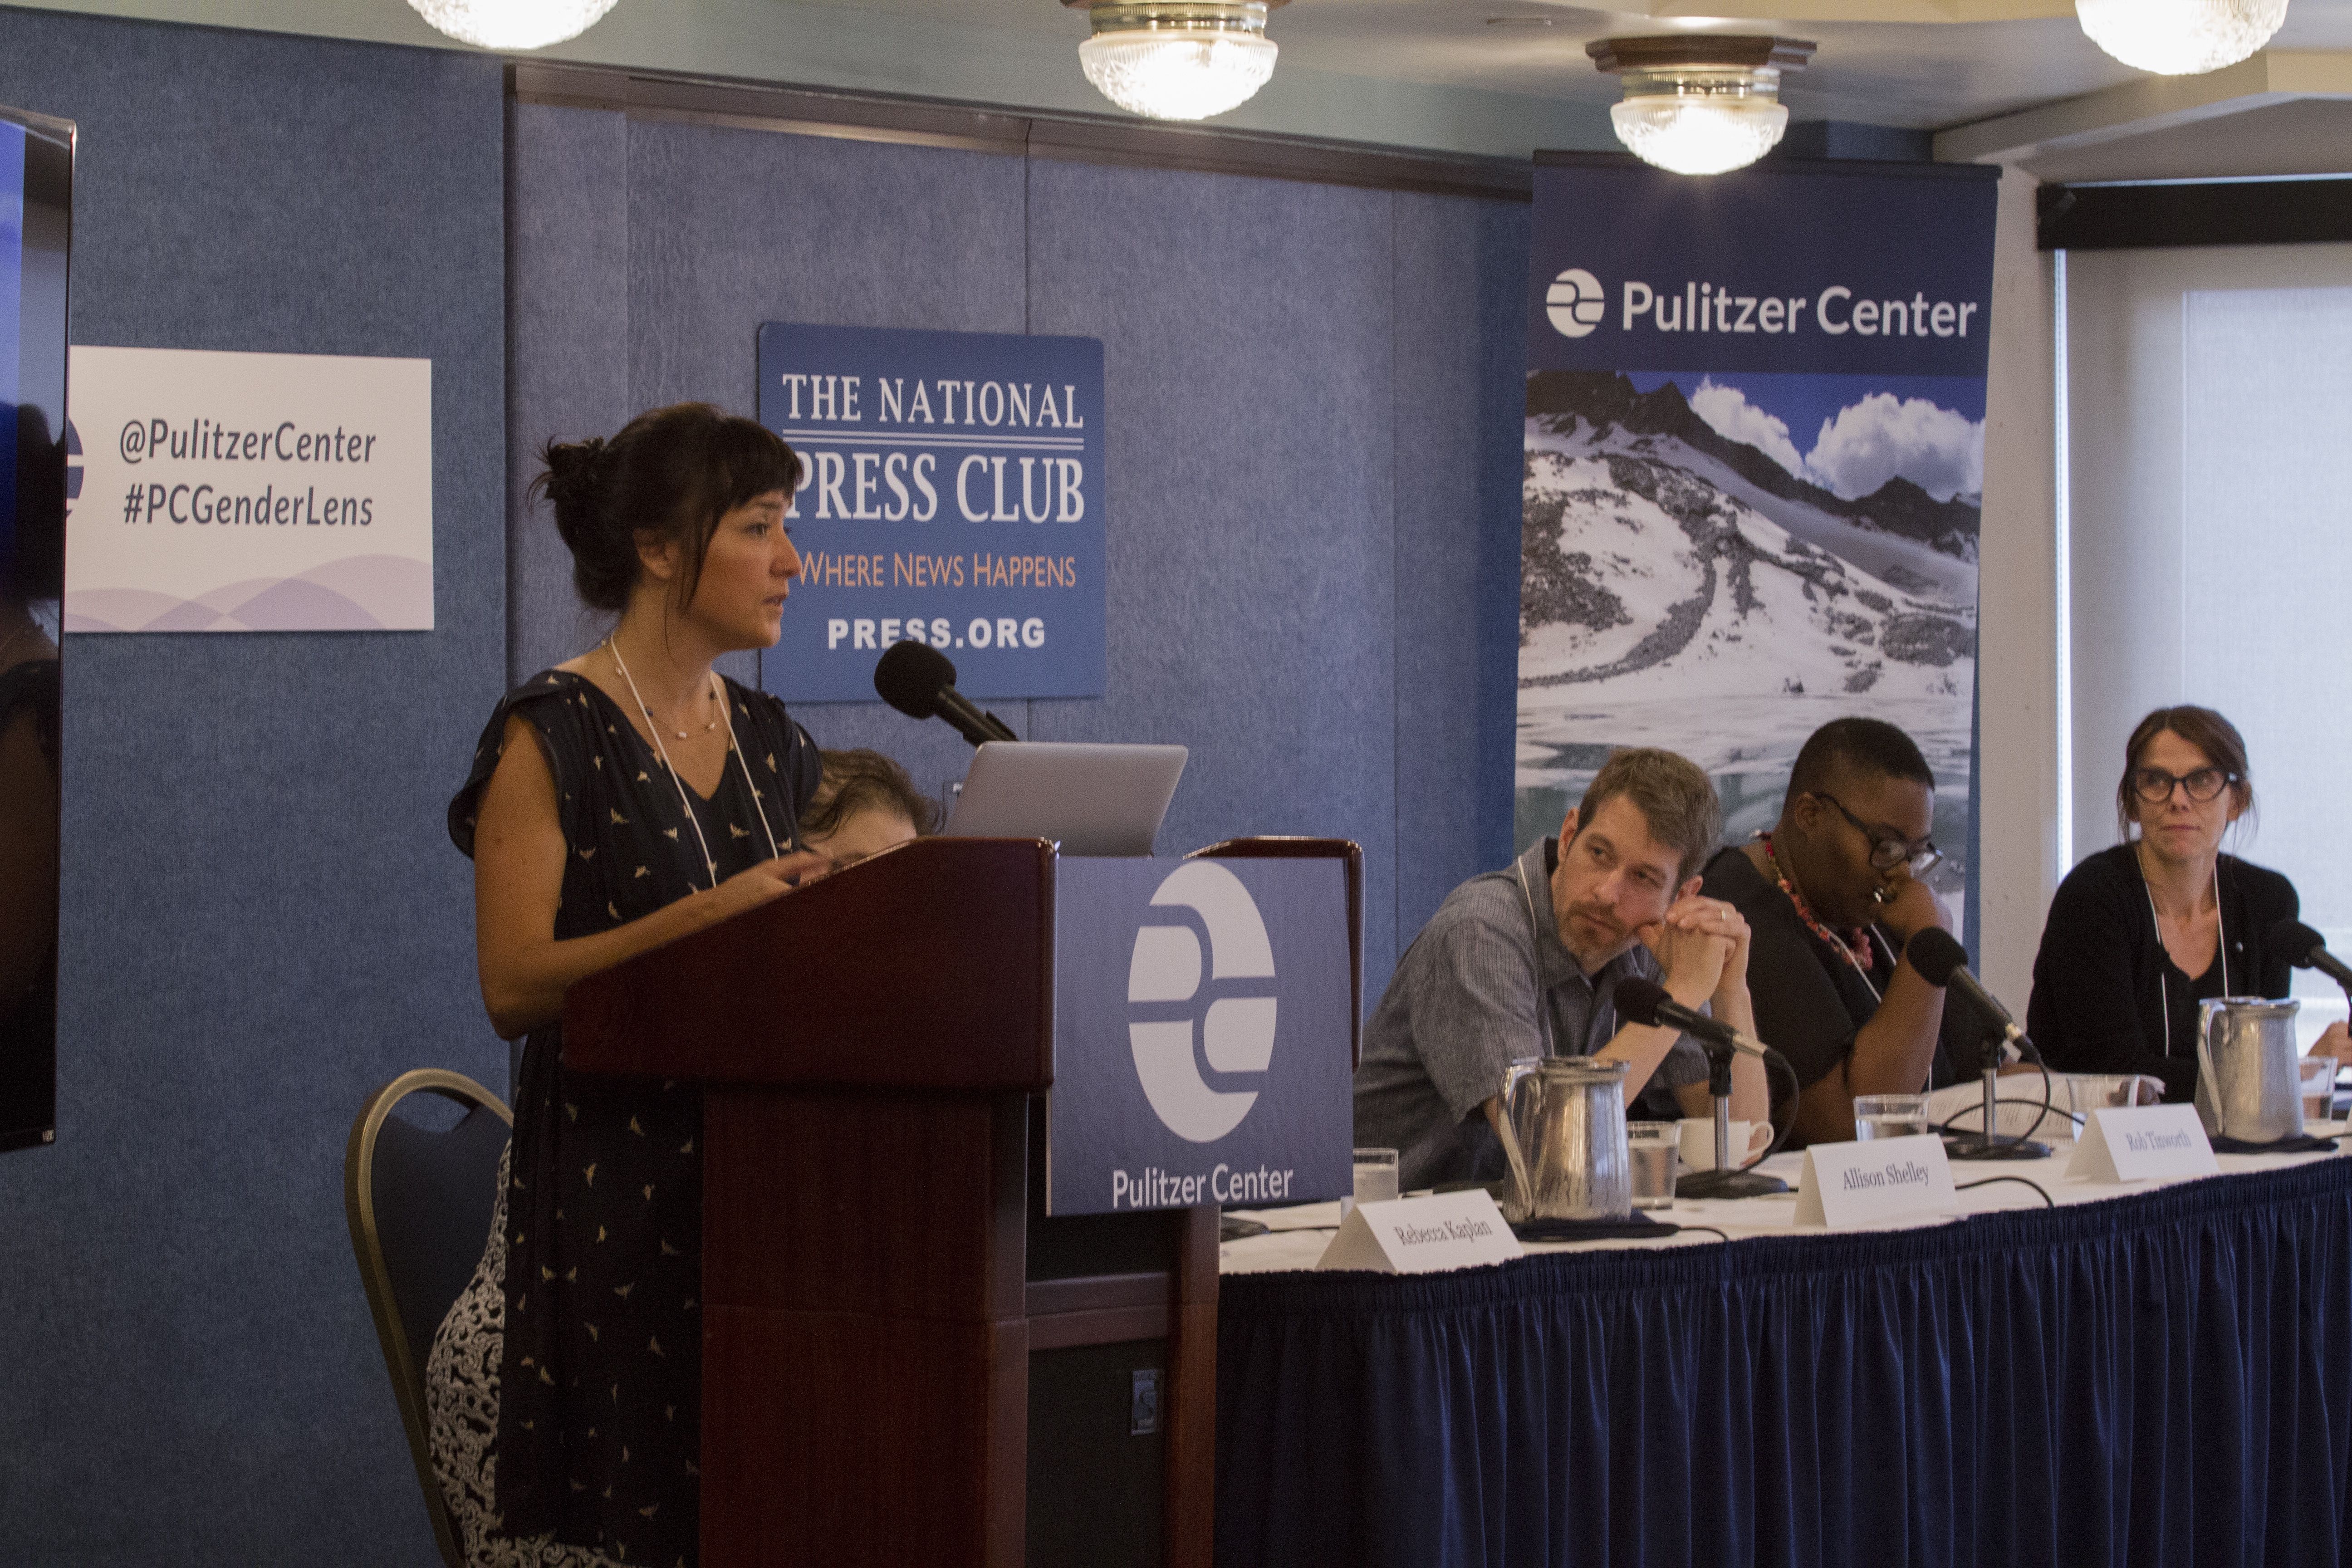 Panelist Allison Shelley describes her work in India, Nepal, Nigeria, and Senegal, during the Global Health panel at Pulitzer Center Gender Lens Conference. Image by Jin Ding. United States, 2017. 